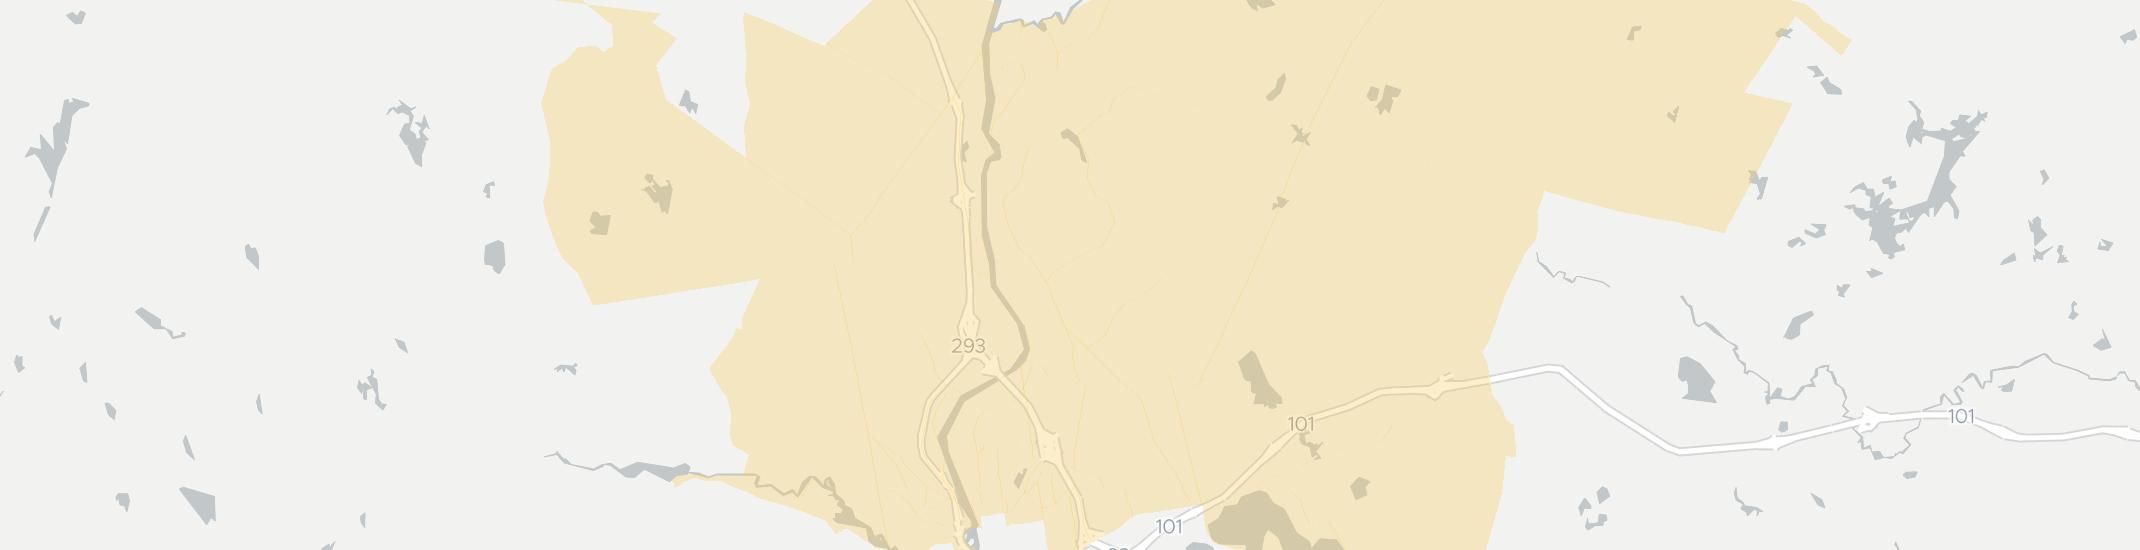 Hooksett Internet Competition Map. Click for interactive map.